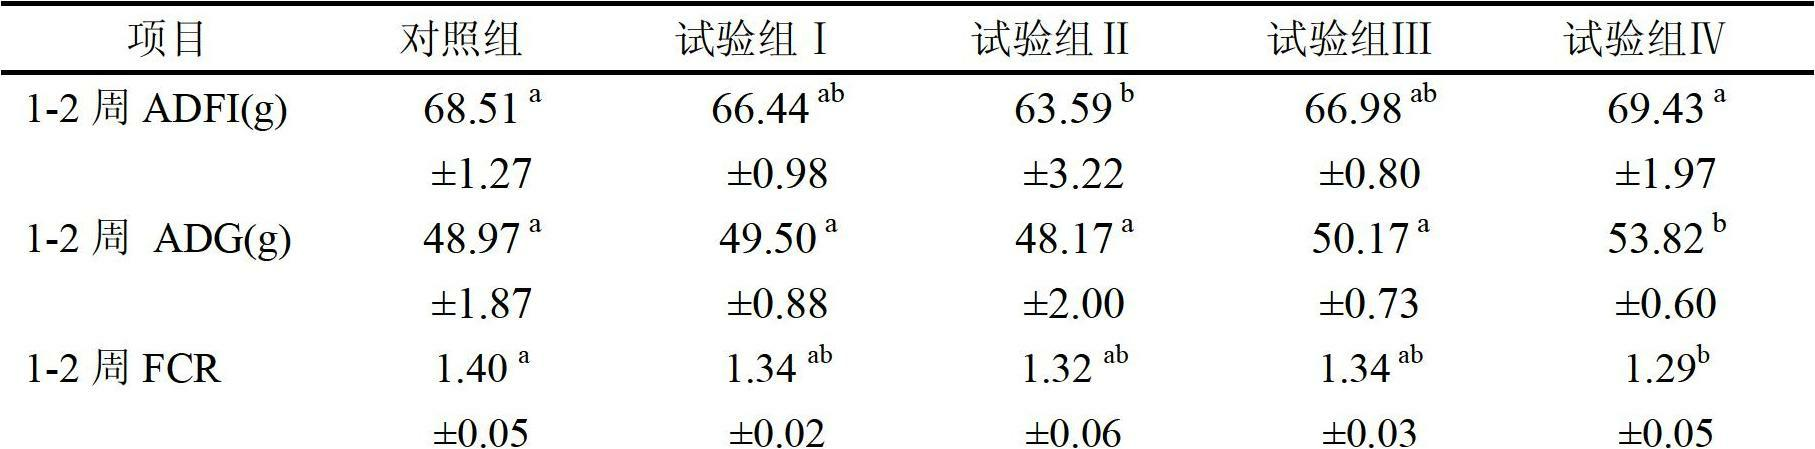 Compound probiotics preparation for geese and method for preparing same